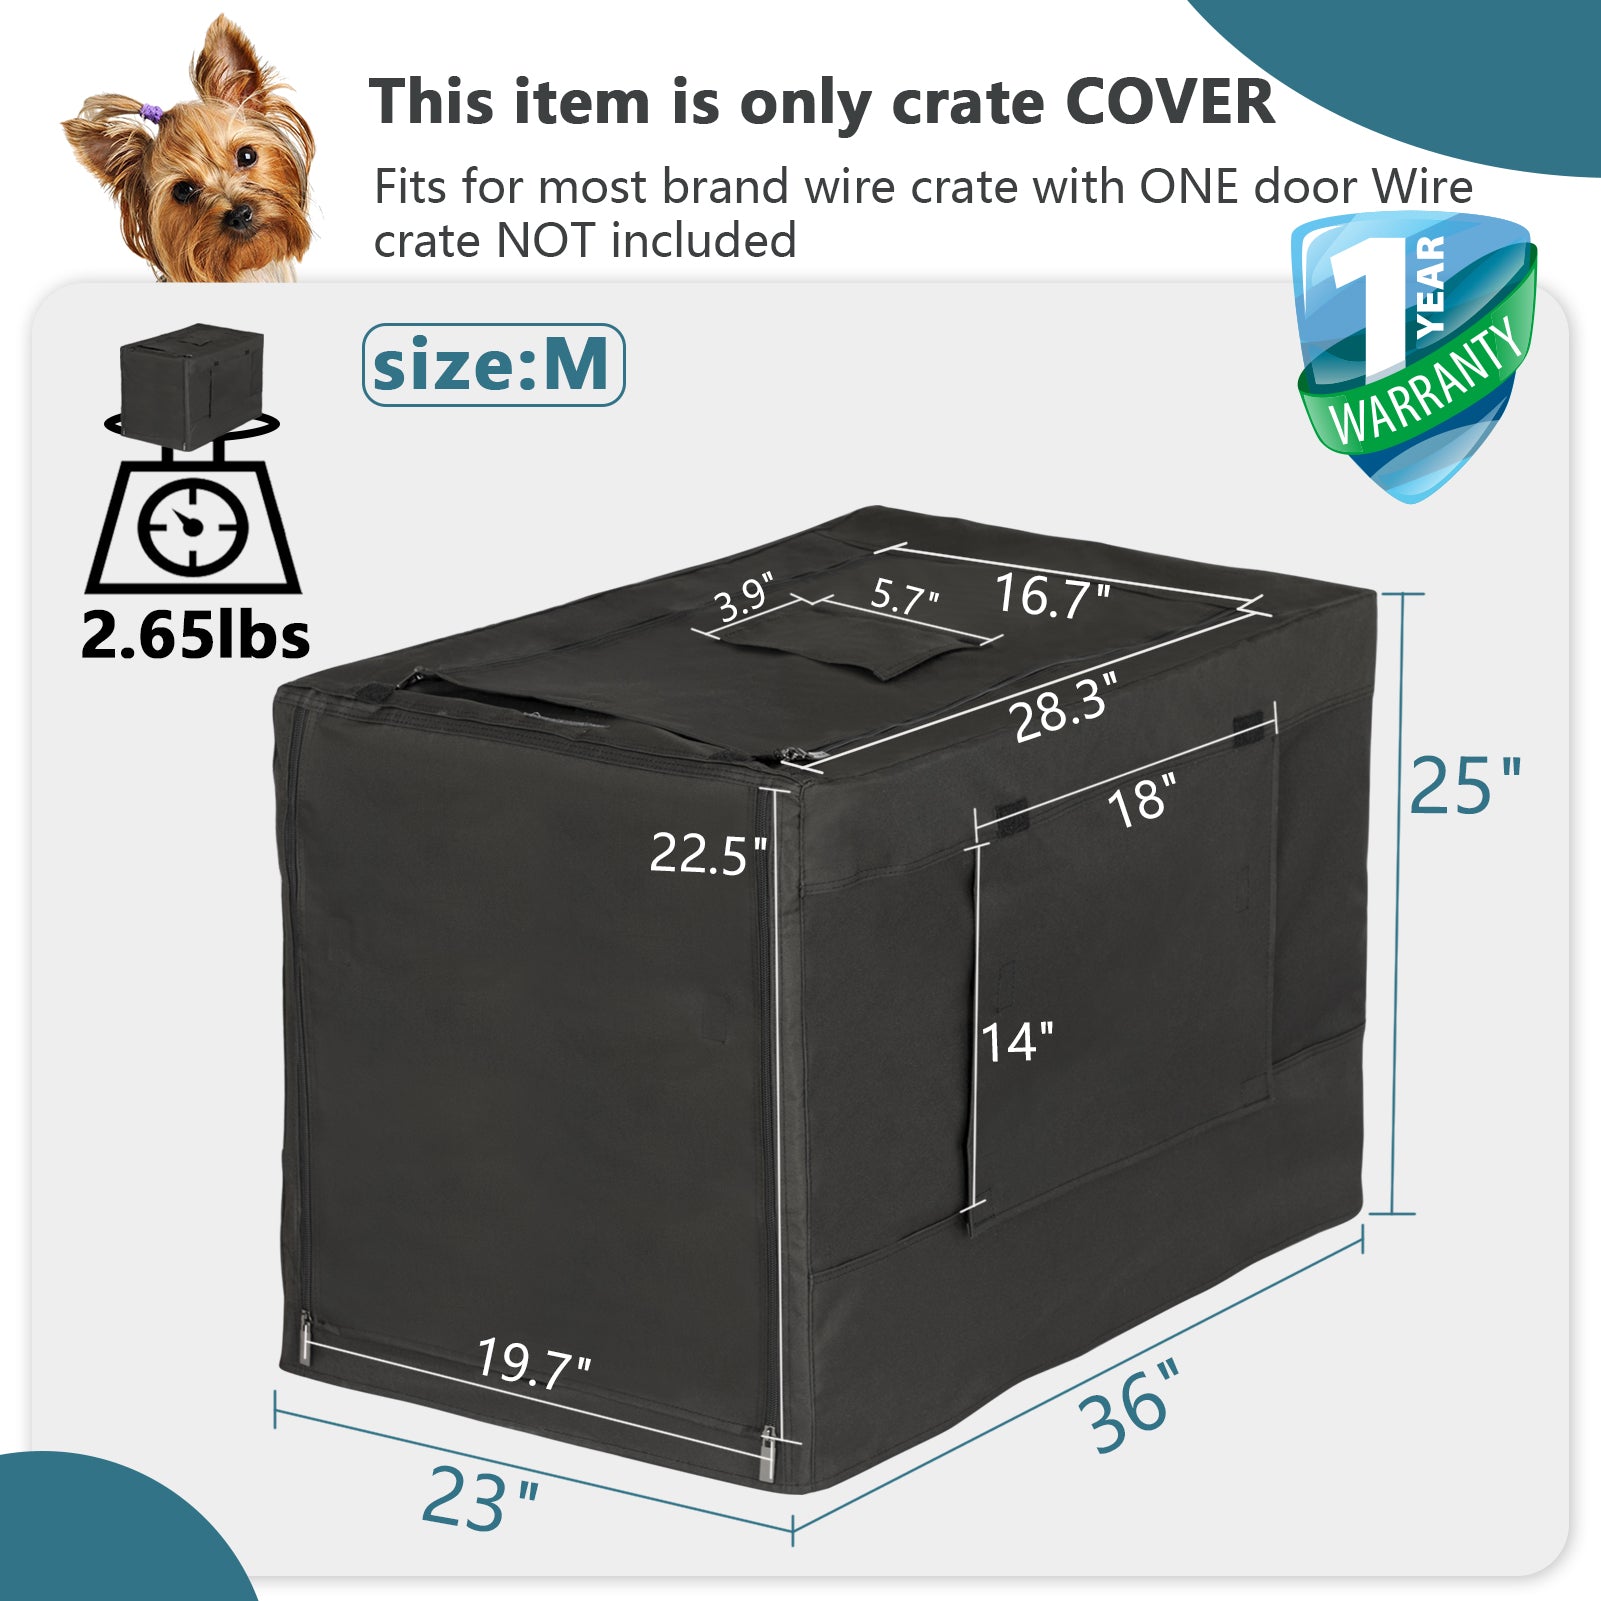 Petsfit-Dog-Crate-Cover-03